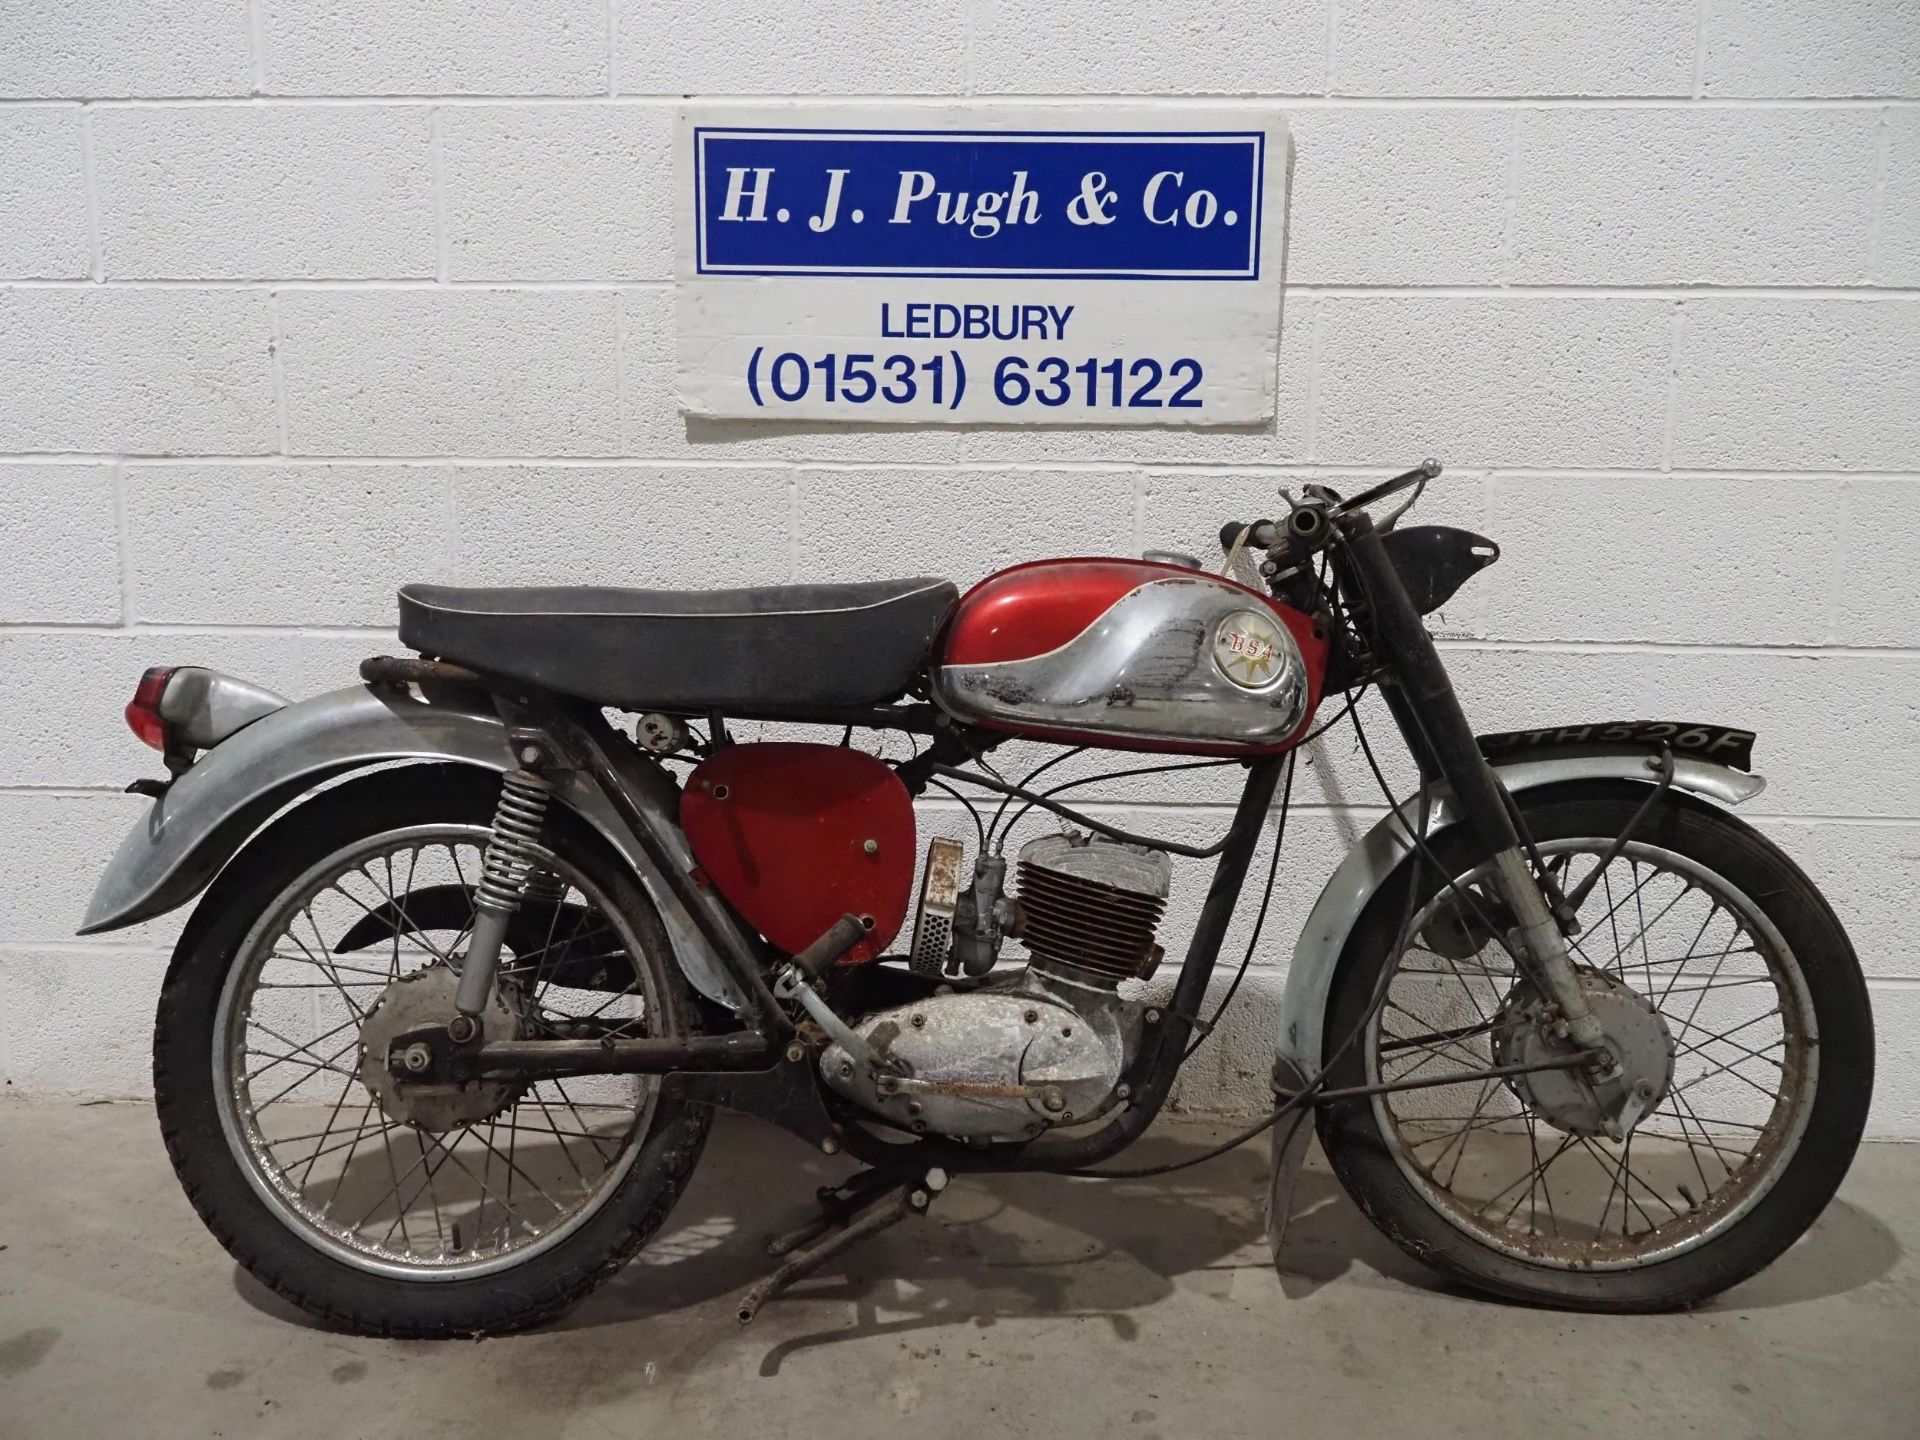 BSA Bantam Sports motorcycle project. 175cc Frame No. D10A 5587 Engine No. D10A 5587 Has been dry